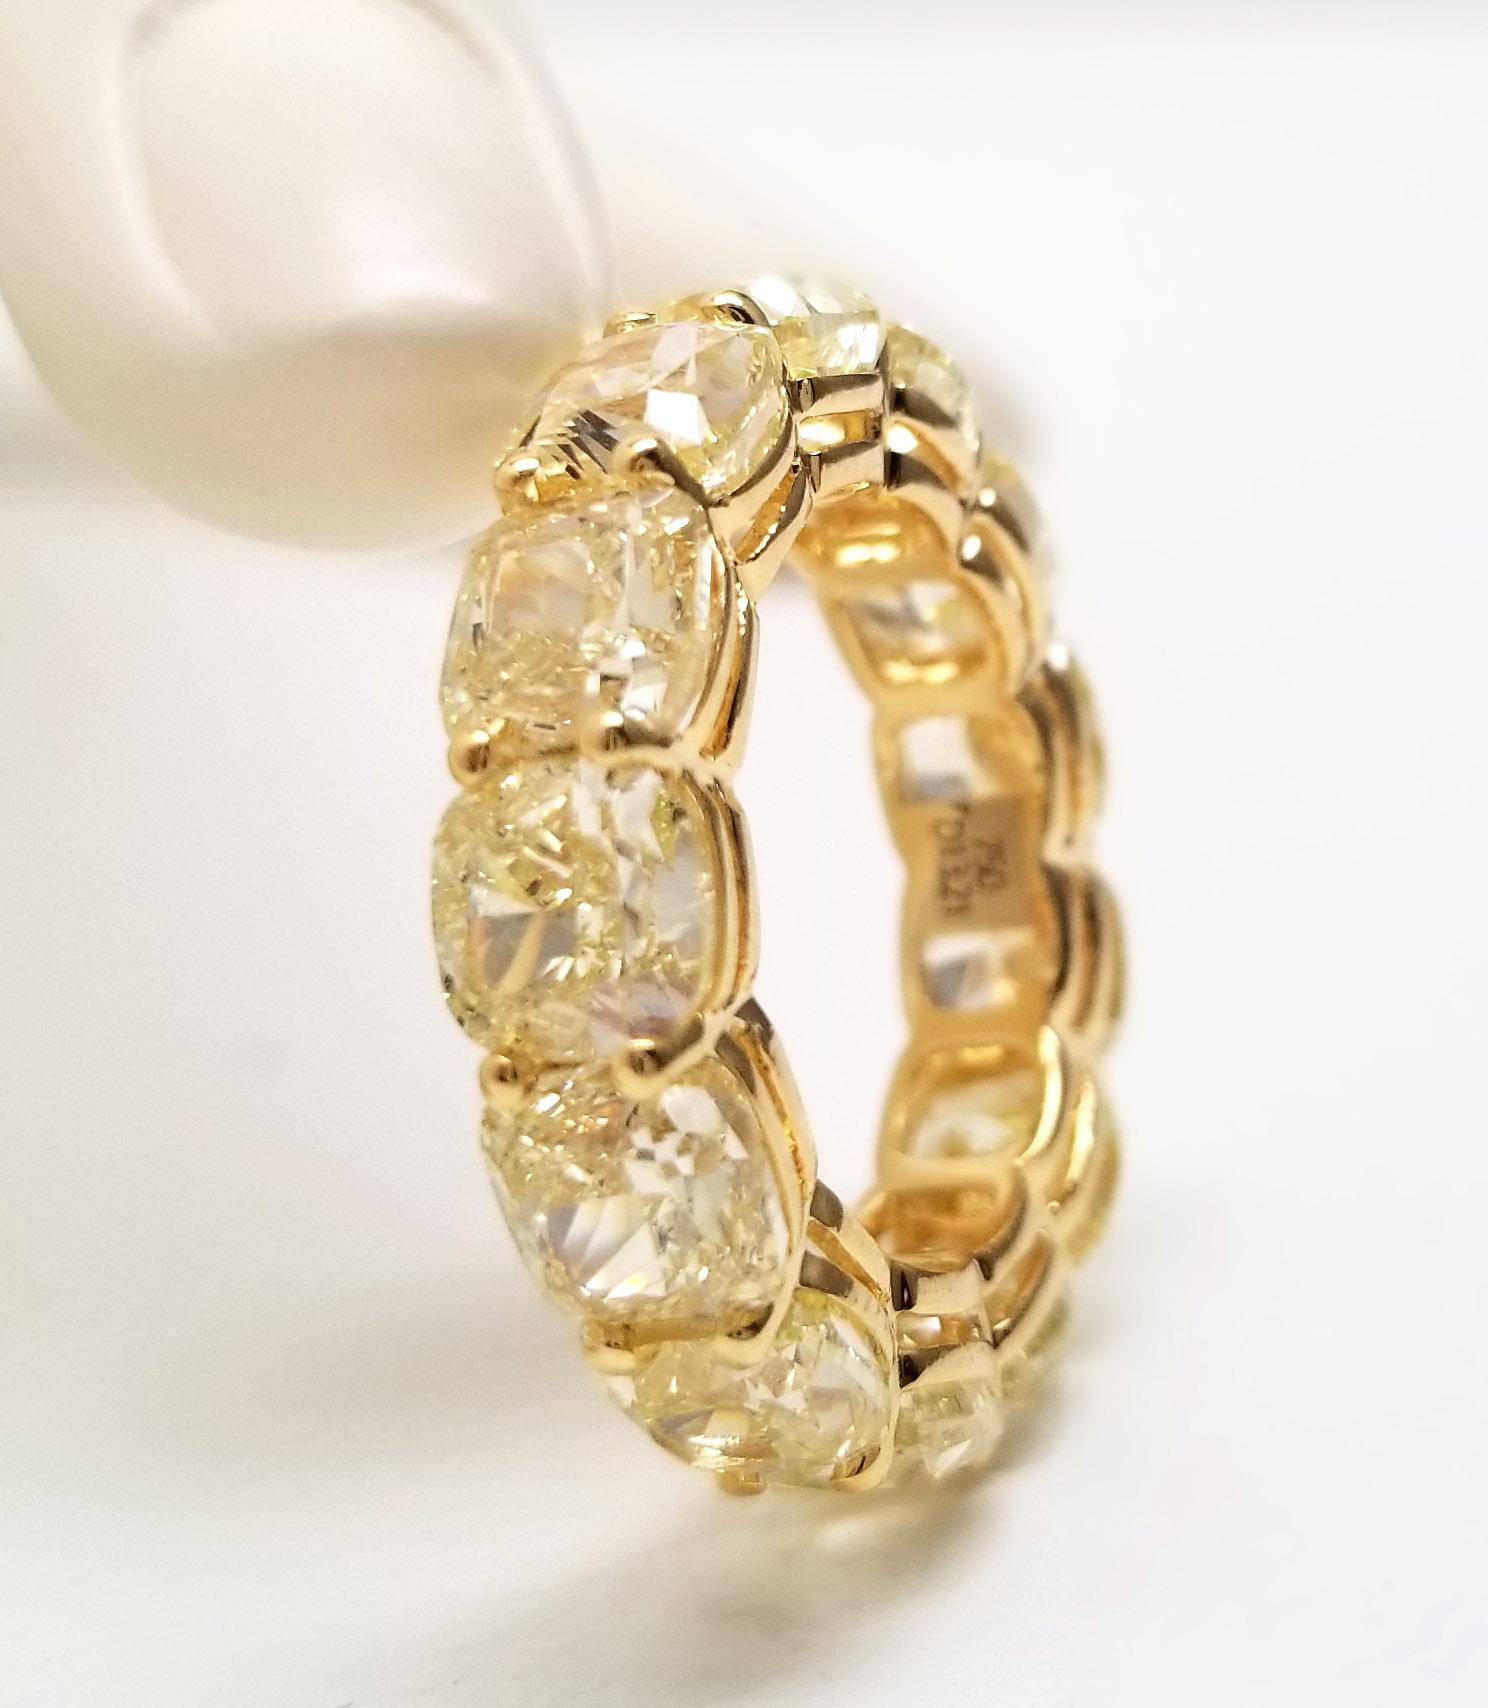 Eternity Band comprised of 13 GIA-Certified Cushion-Cut Fancy Light Yellow Diamonds on an 18 Karat Yellow Gold Band. 13.21 carats of Natural Fancy Light Yellow Diamonds from Scarselli form an elegant eternity band, fashioned with 18K yellow gold.